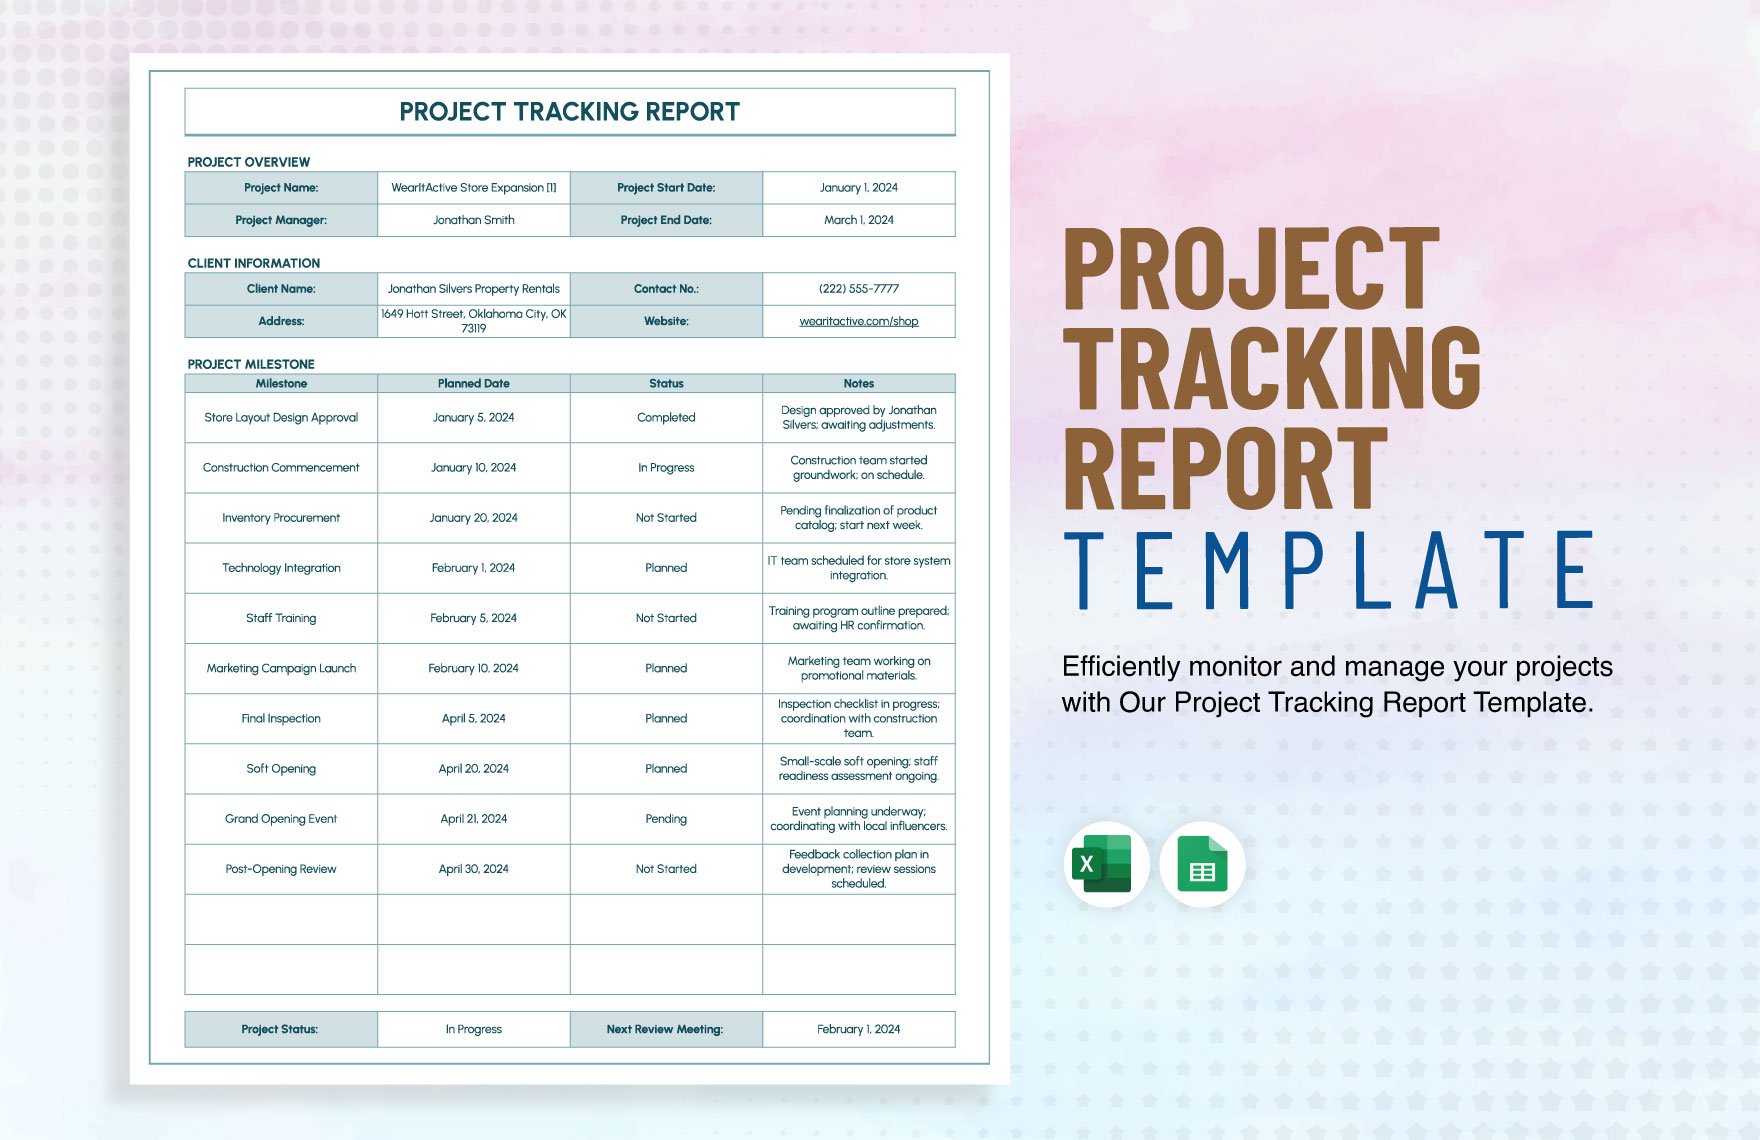 Project Tracking Report Template in Excel, Google Sheets